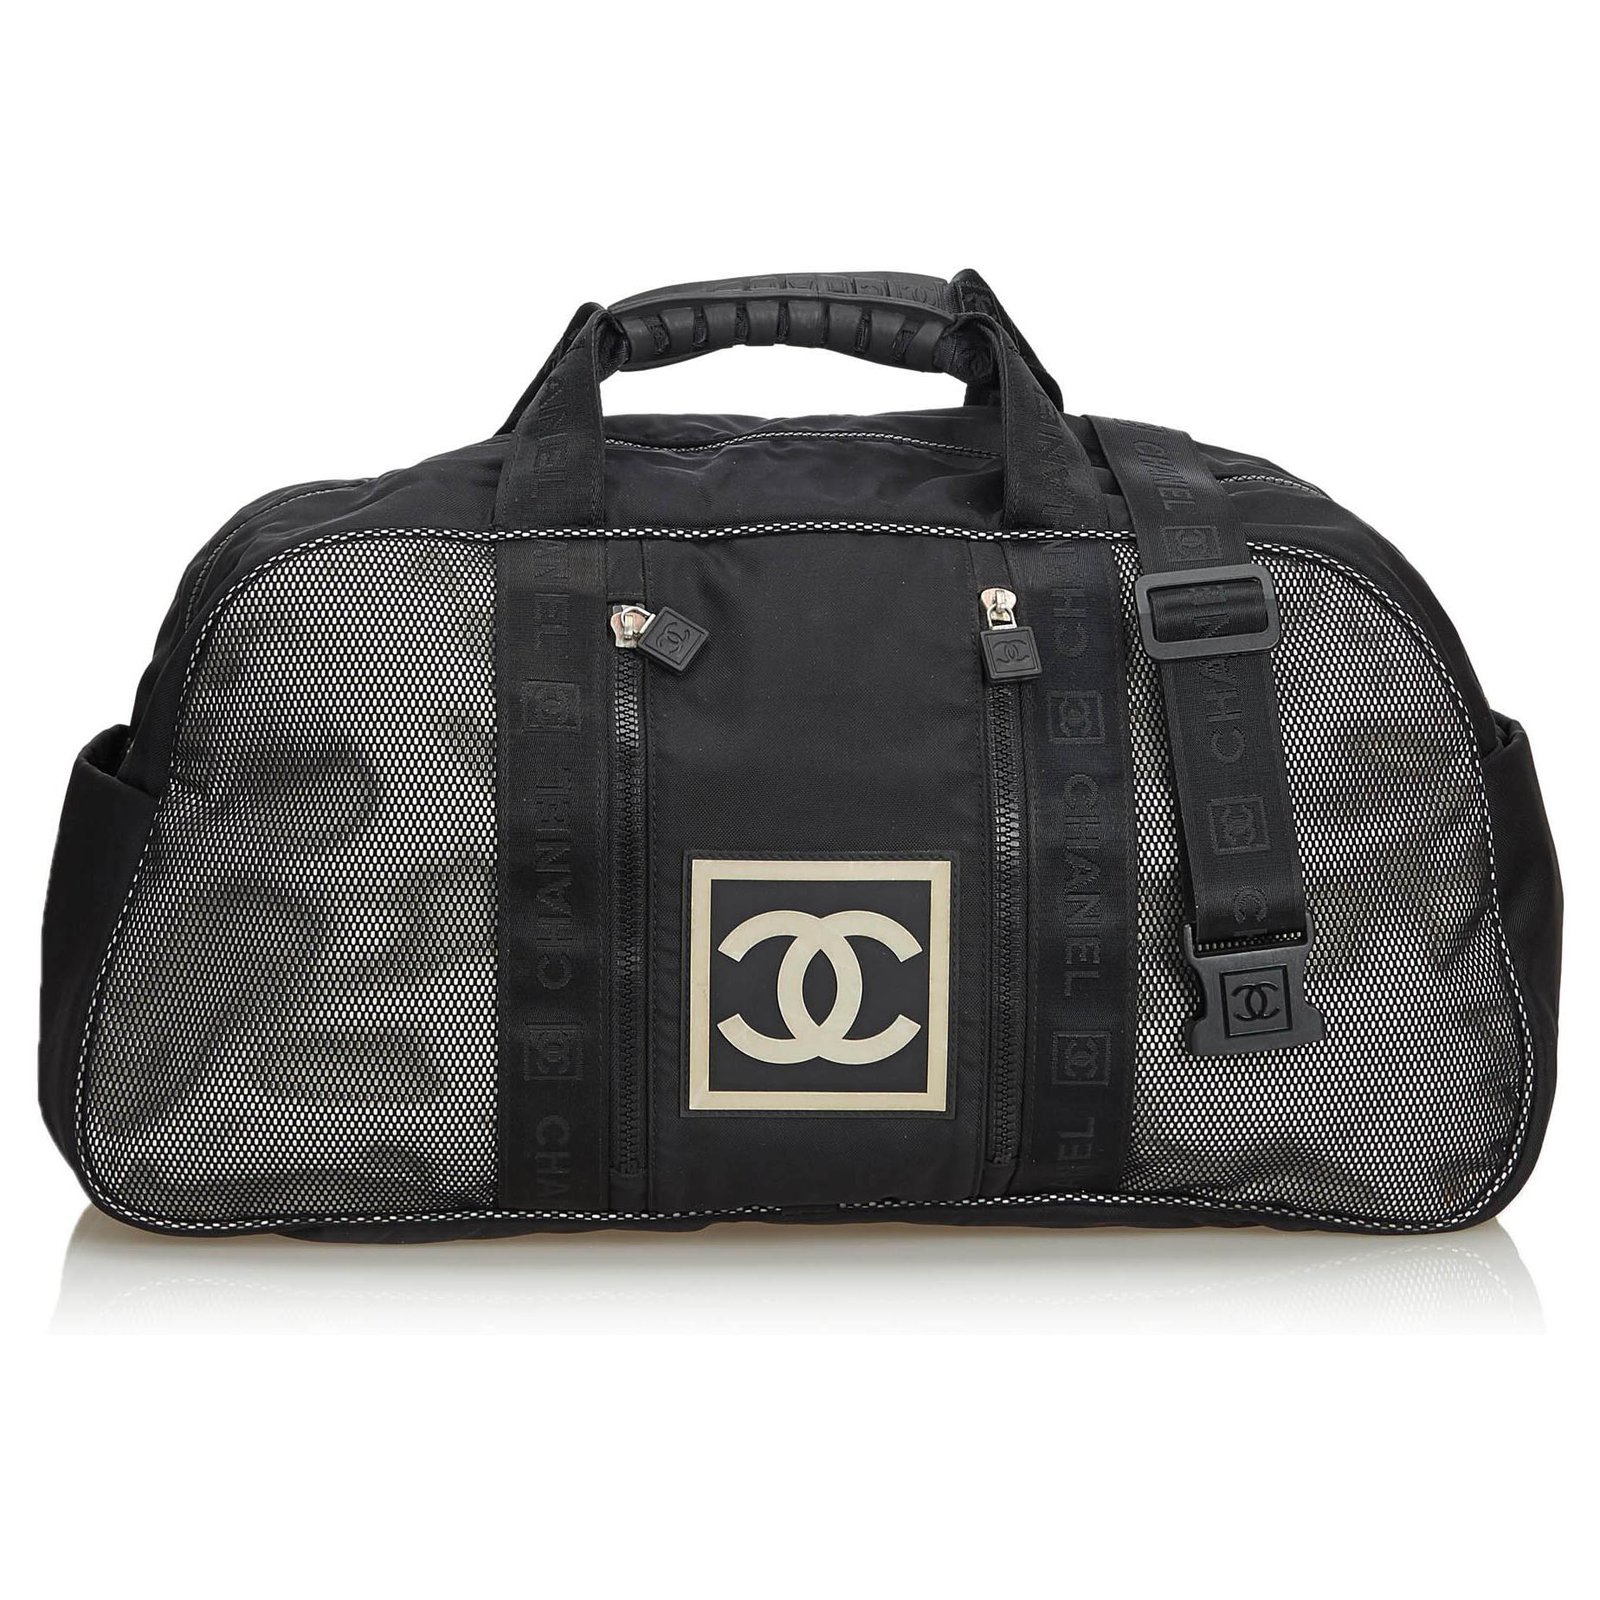 Chanel Duffel Mini Travelling Bag and a Gym Bag at Plbagsgh 